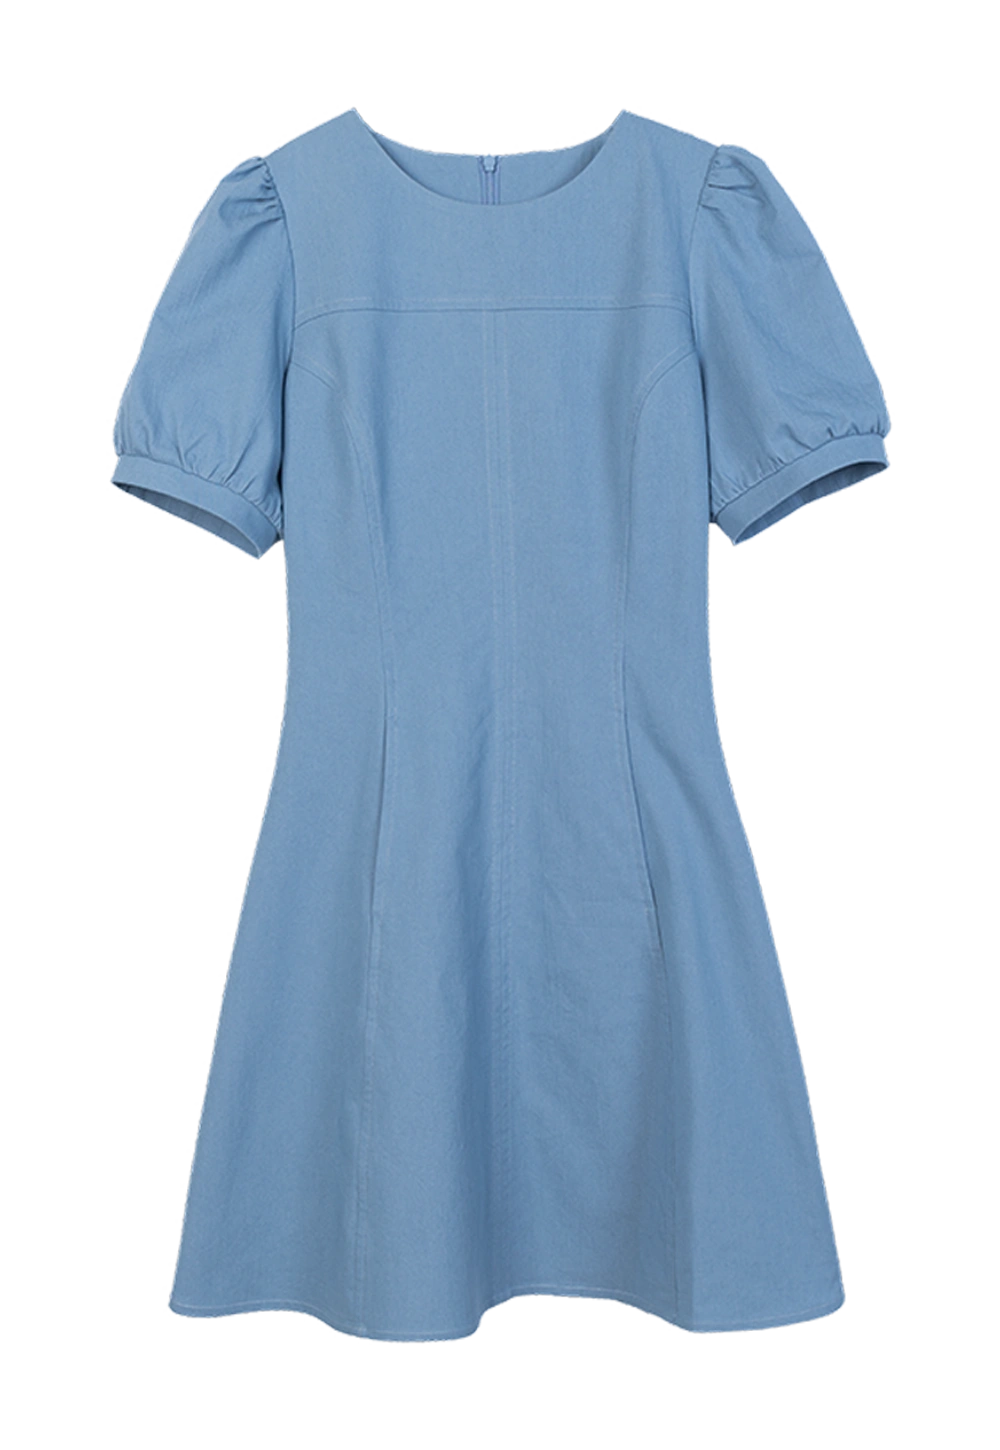 Women's Elegant Blue A-Line Dress with Puffed Sleeves - Perfect for Casual or Formal Wear